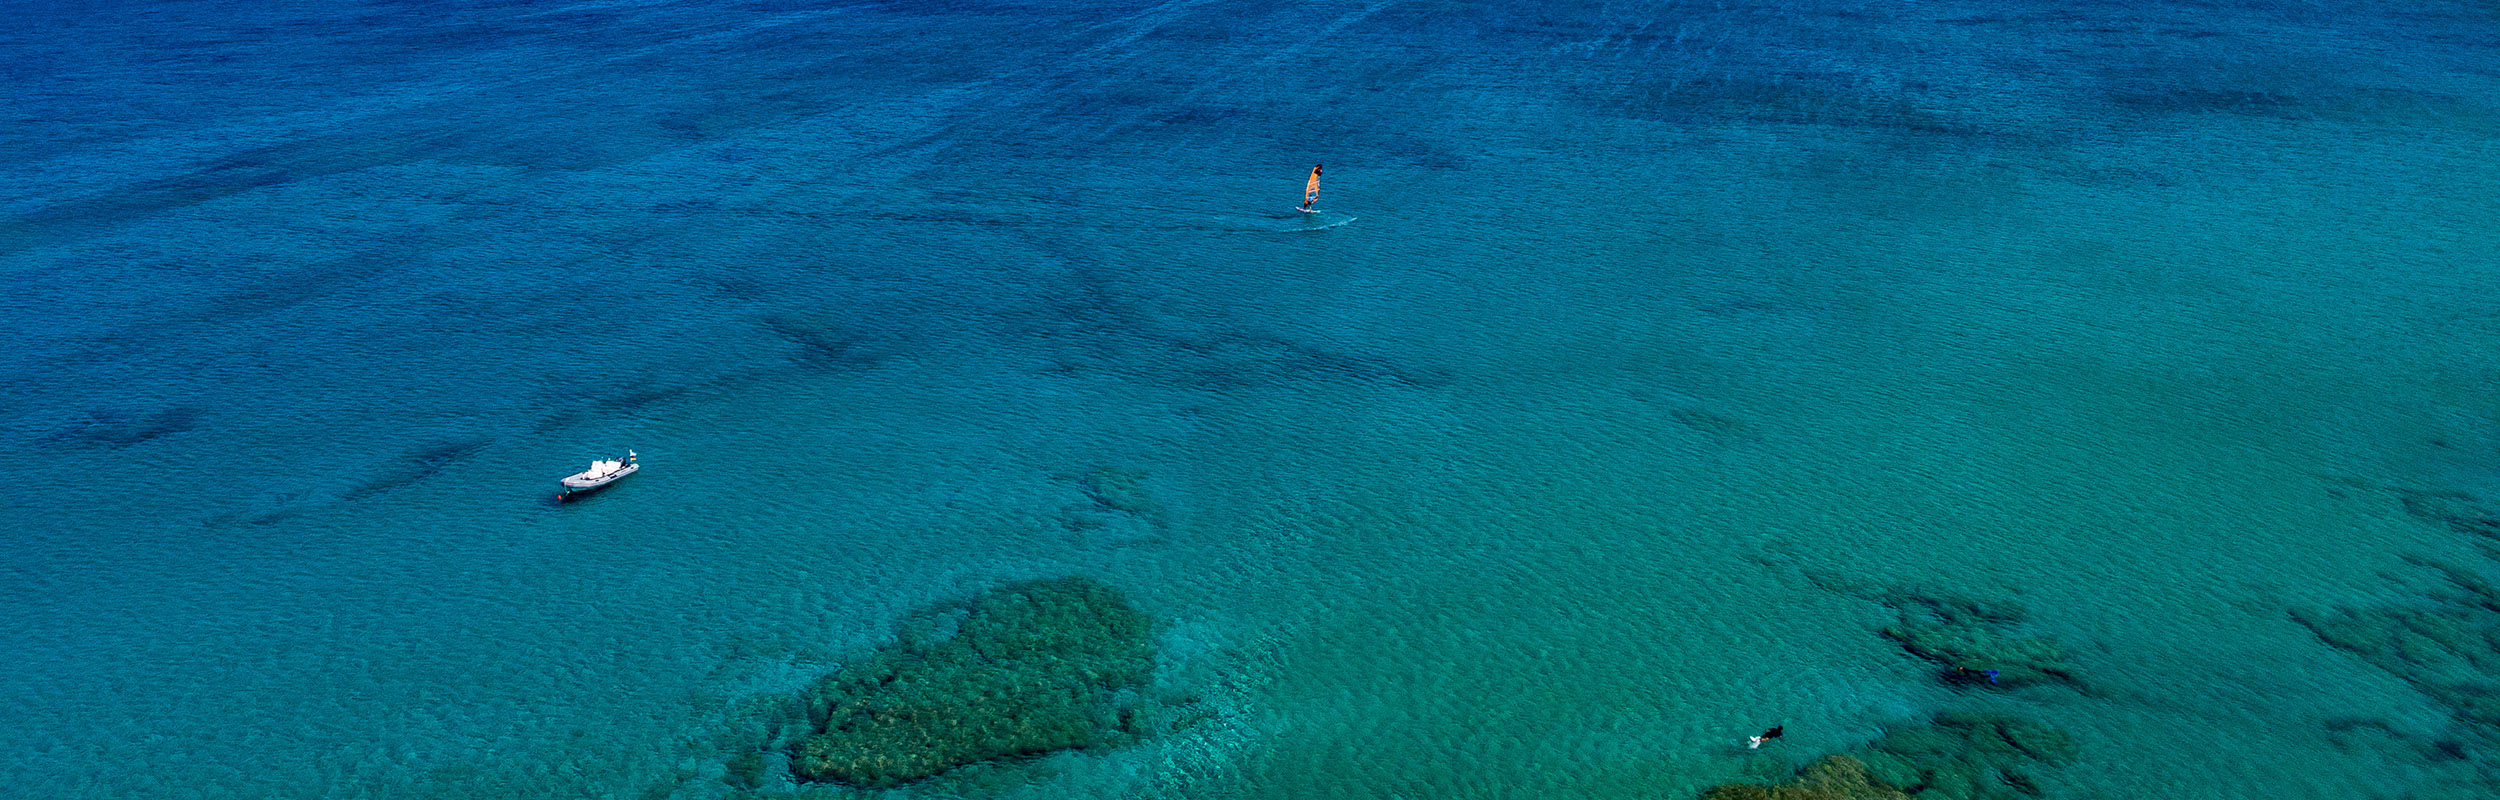 Mediterranean Sea  off the coast of Greece with crystal clear blue water and active wind surfer